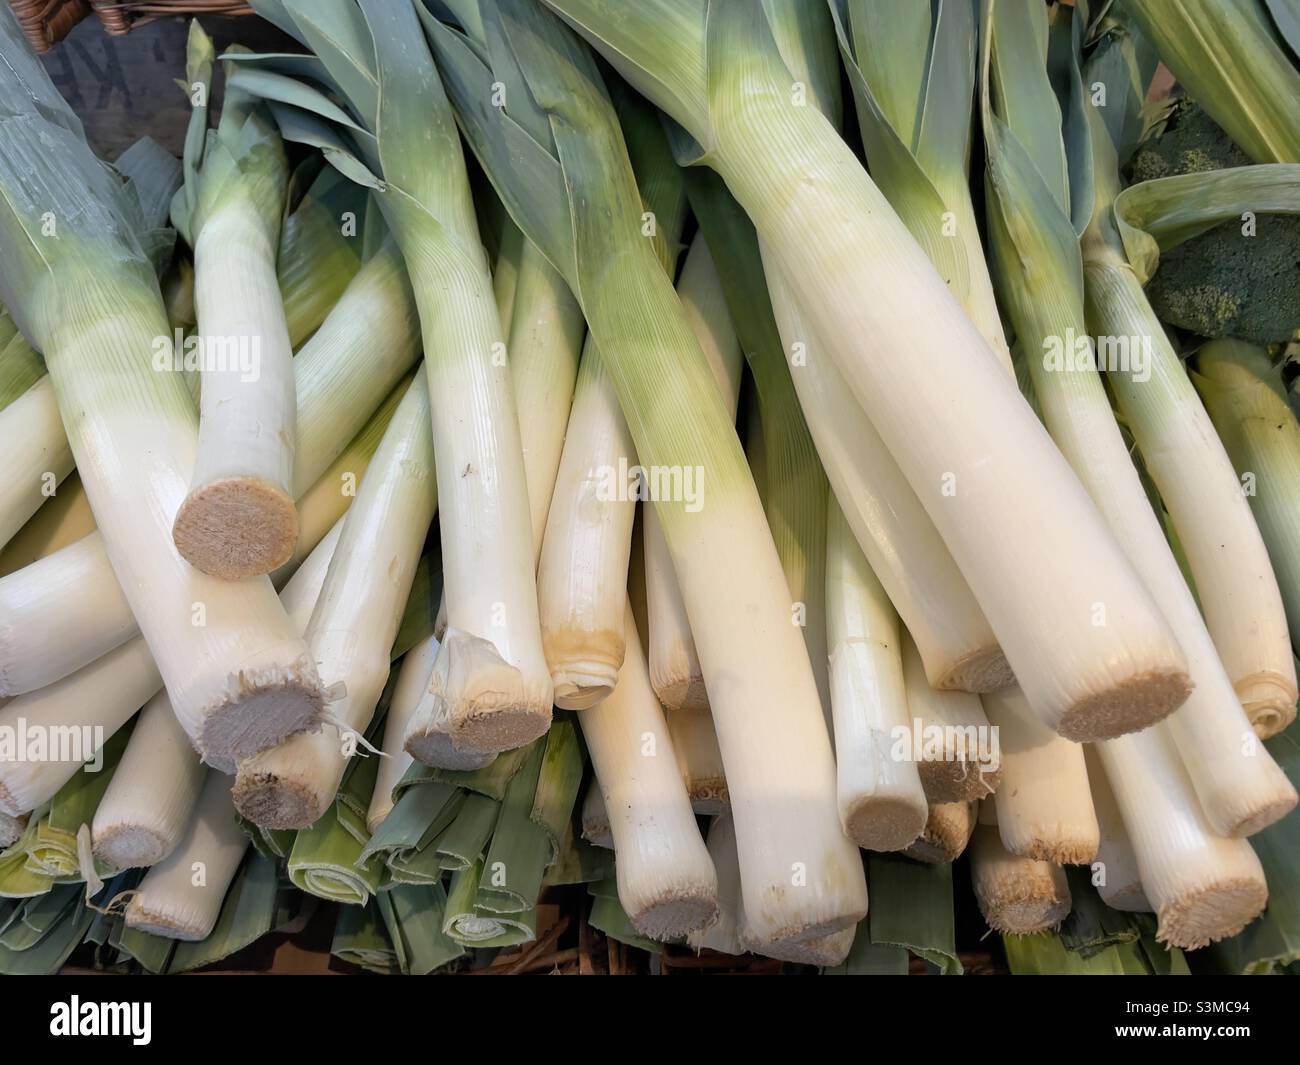 Leeks For sale in the local farm shop, Stock Photo